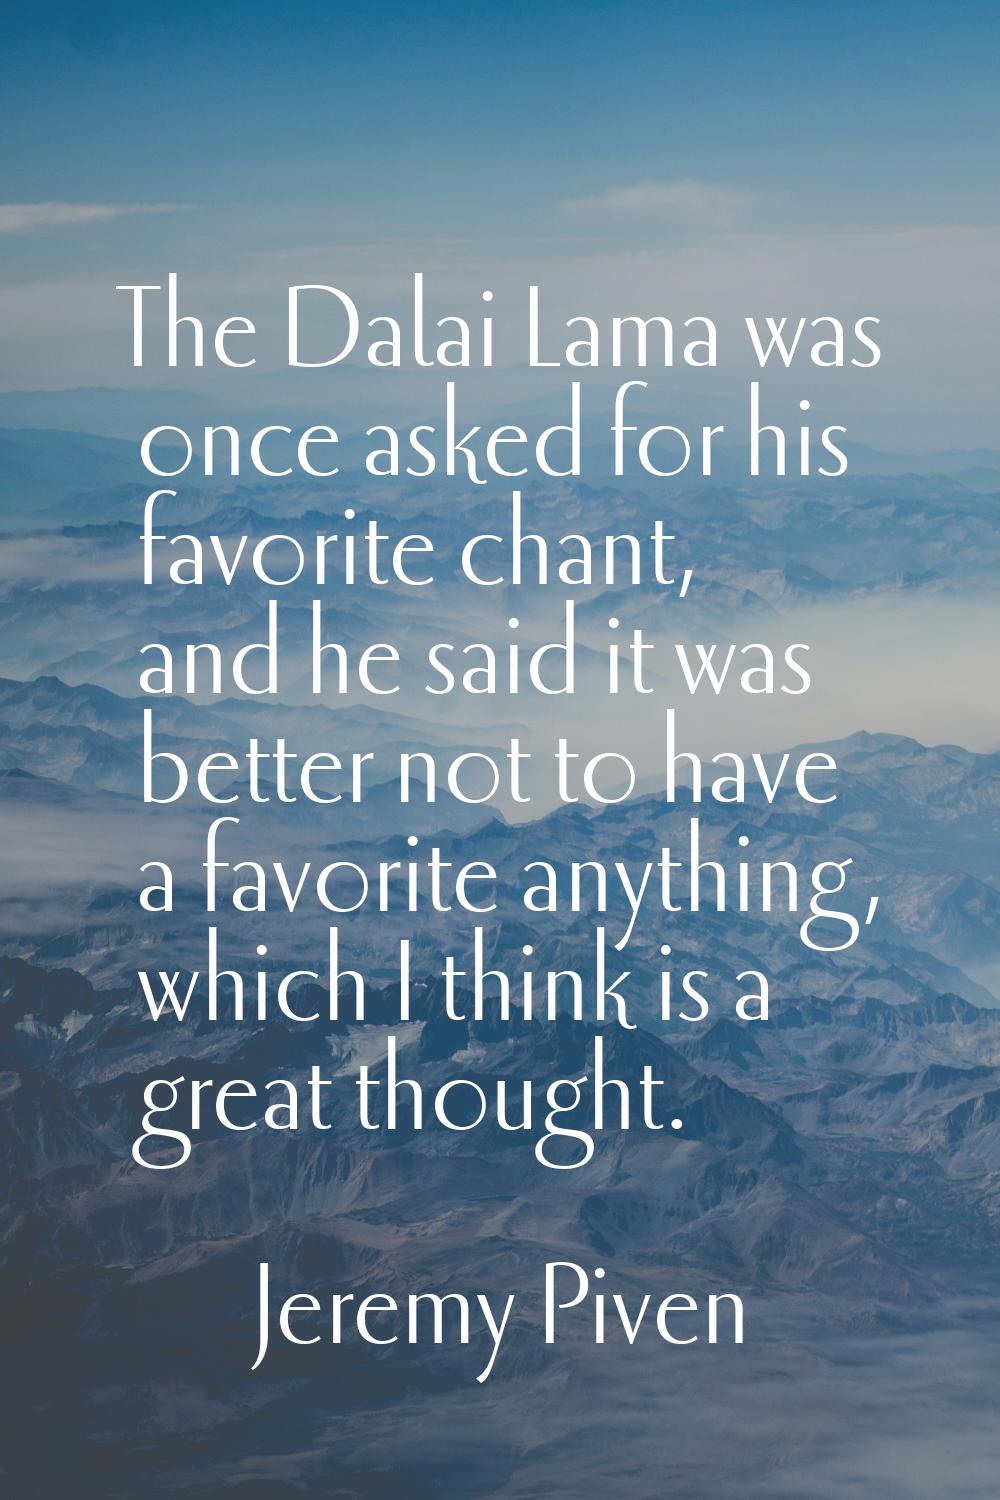 The Dalai Lama was once asked for his favorite chant, and he said it was better not to have a favor